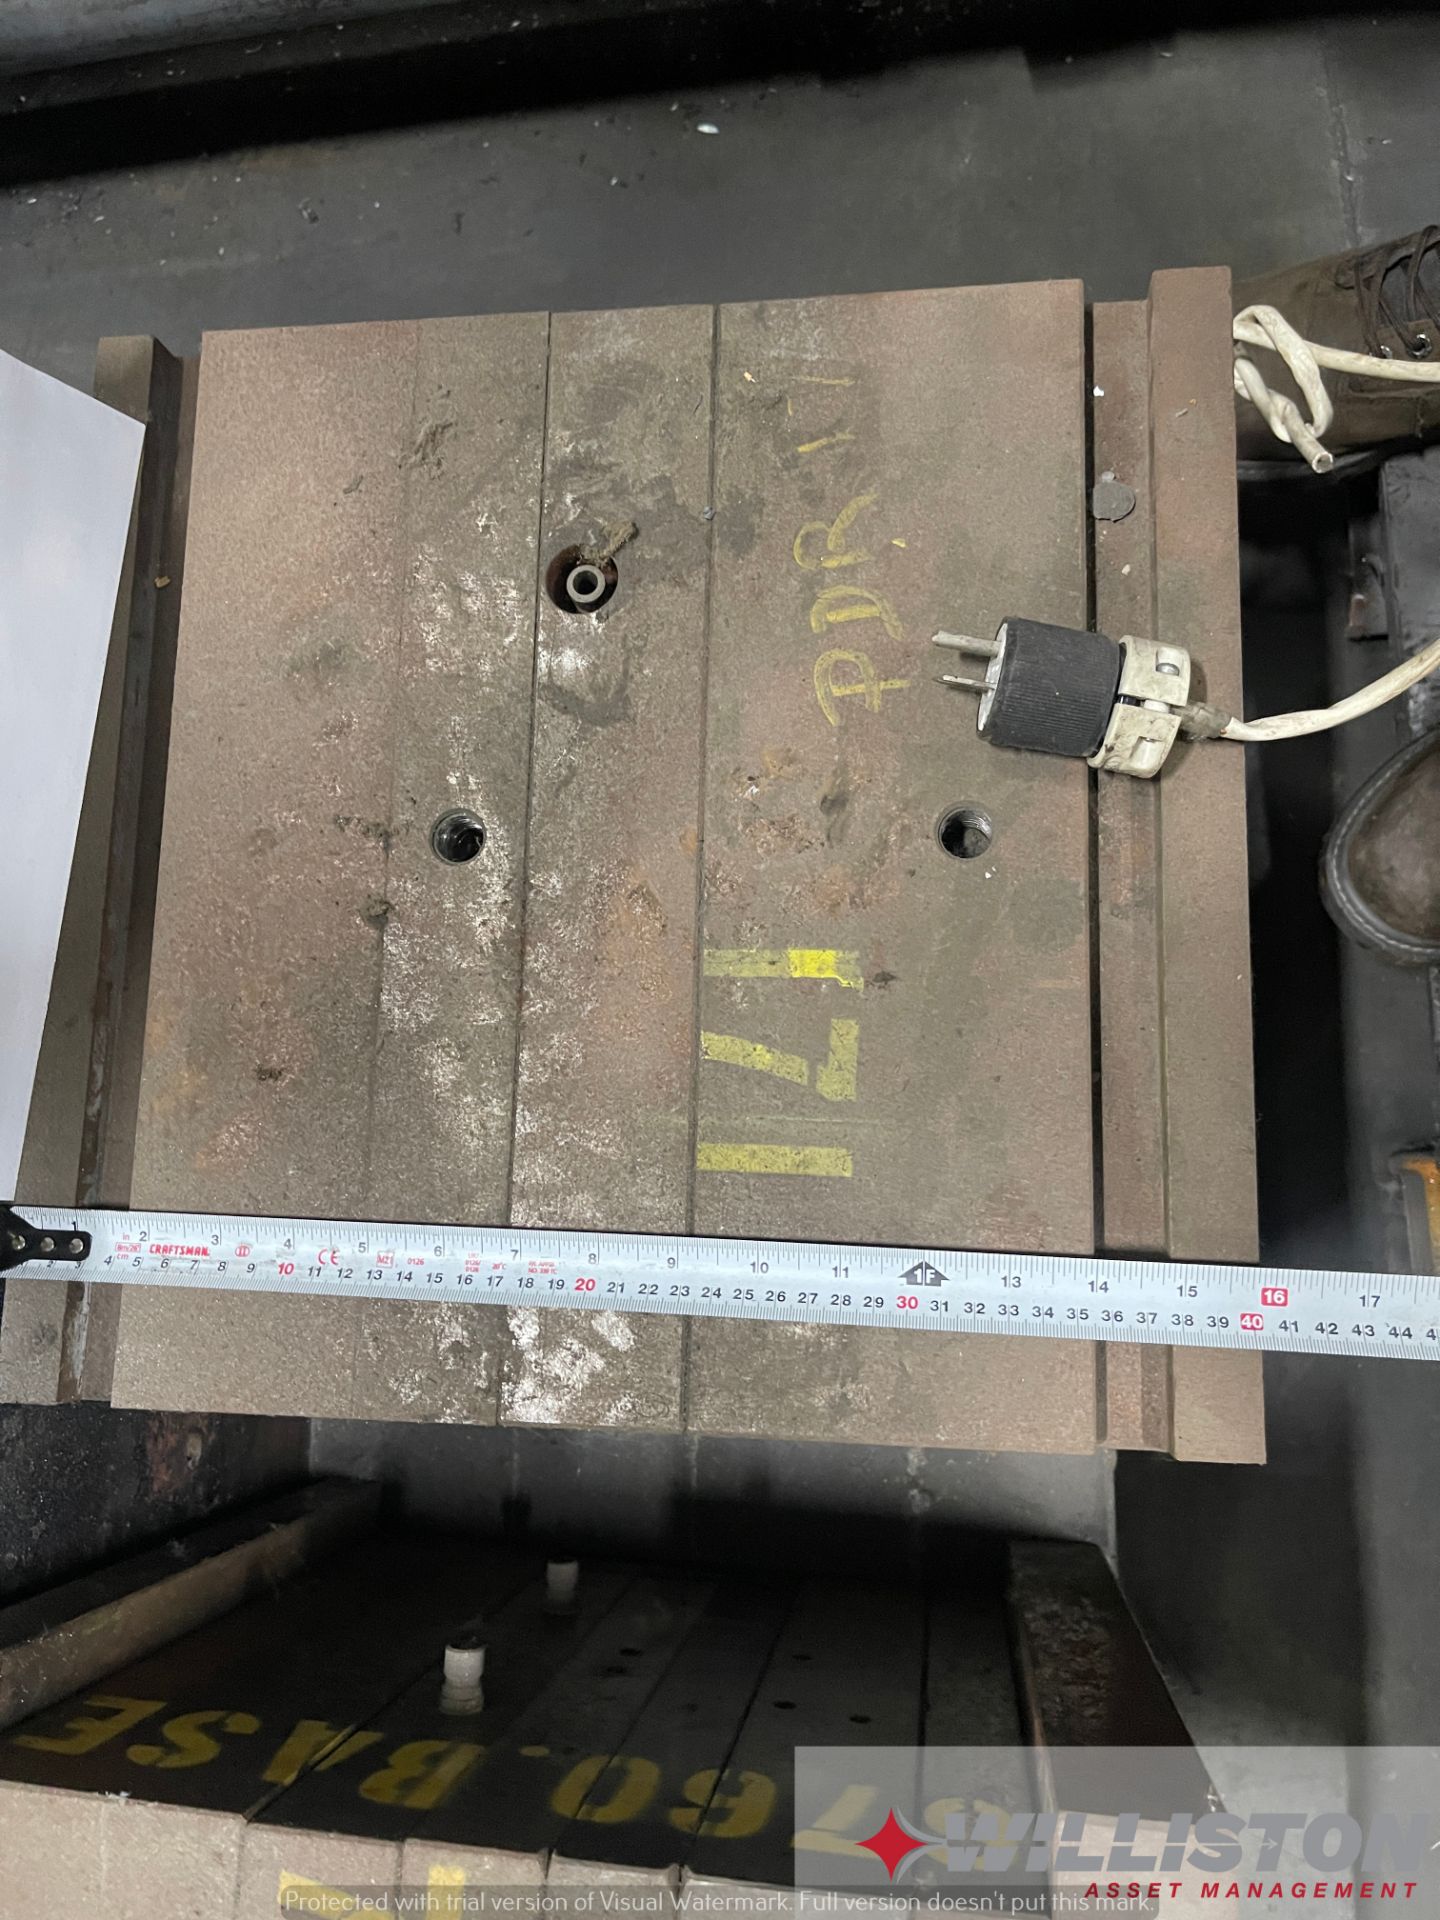 PLASTIC INJECTION MOLD - PDR17 - Image 4 of 7